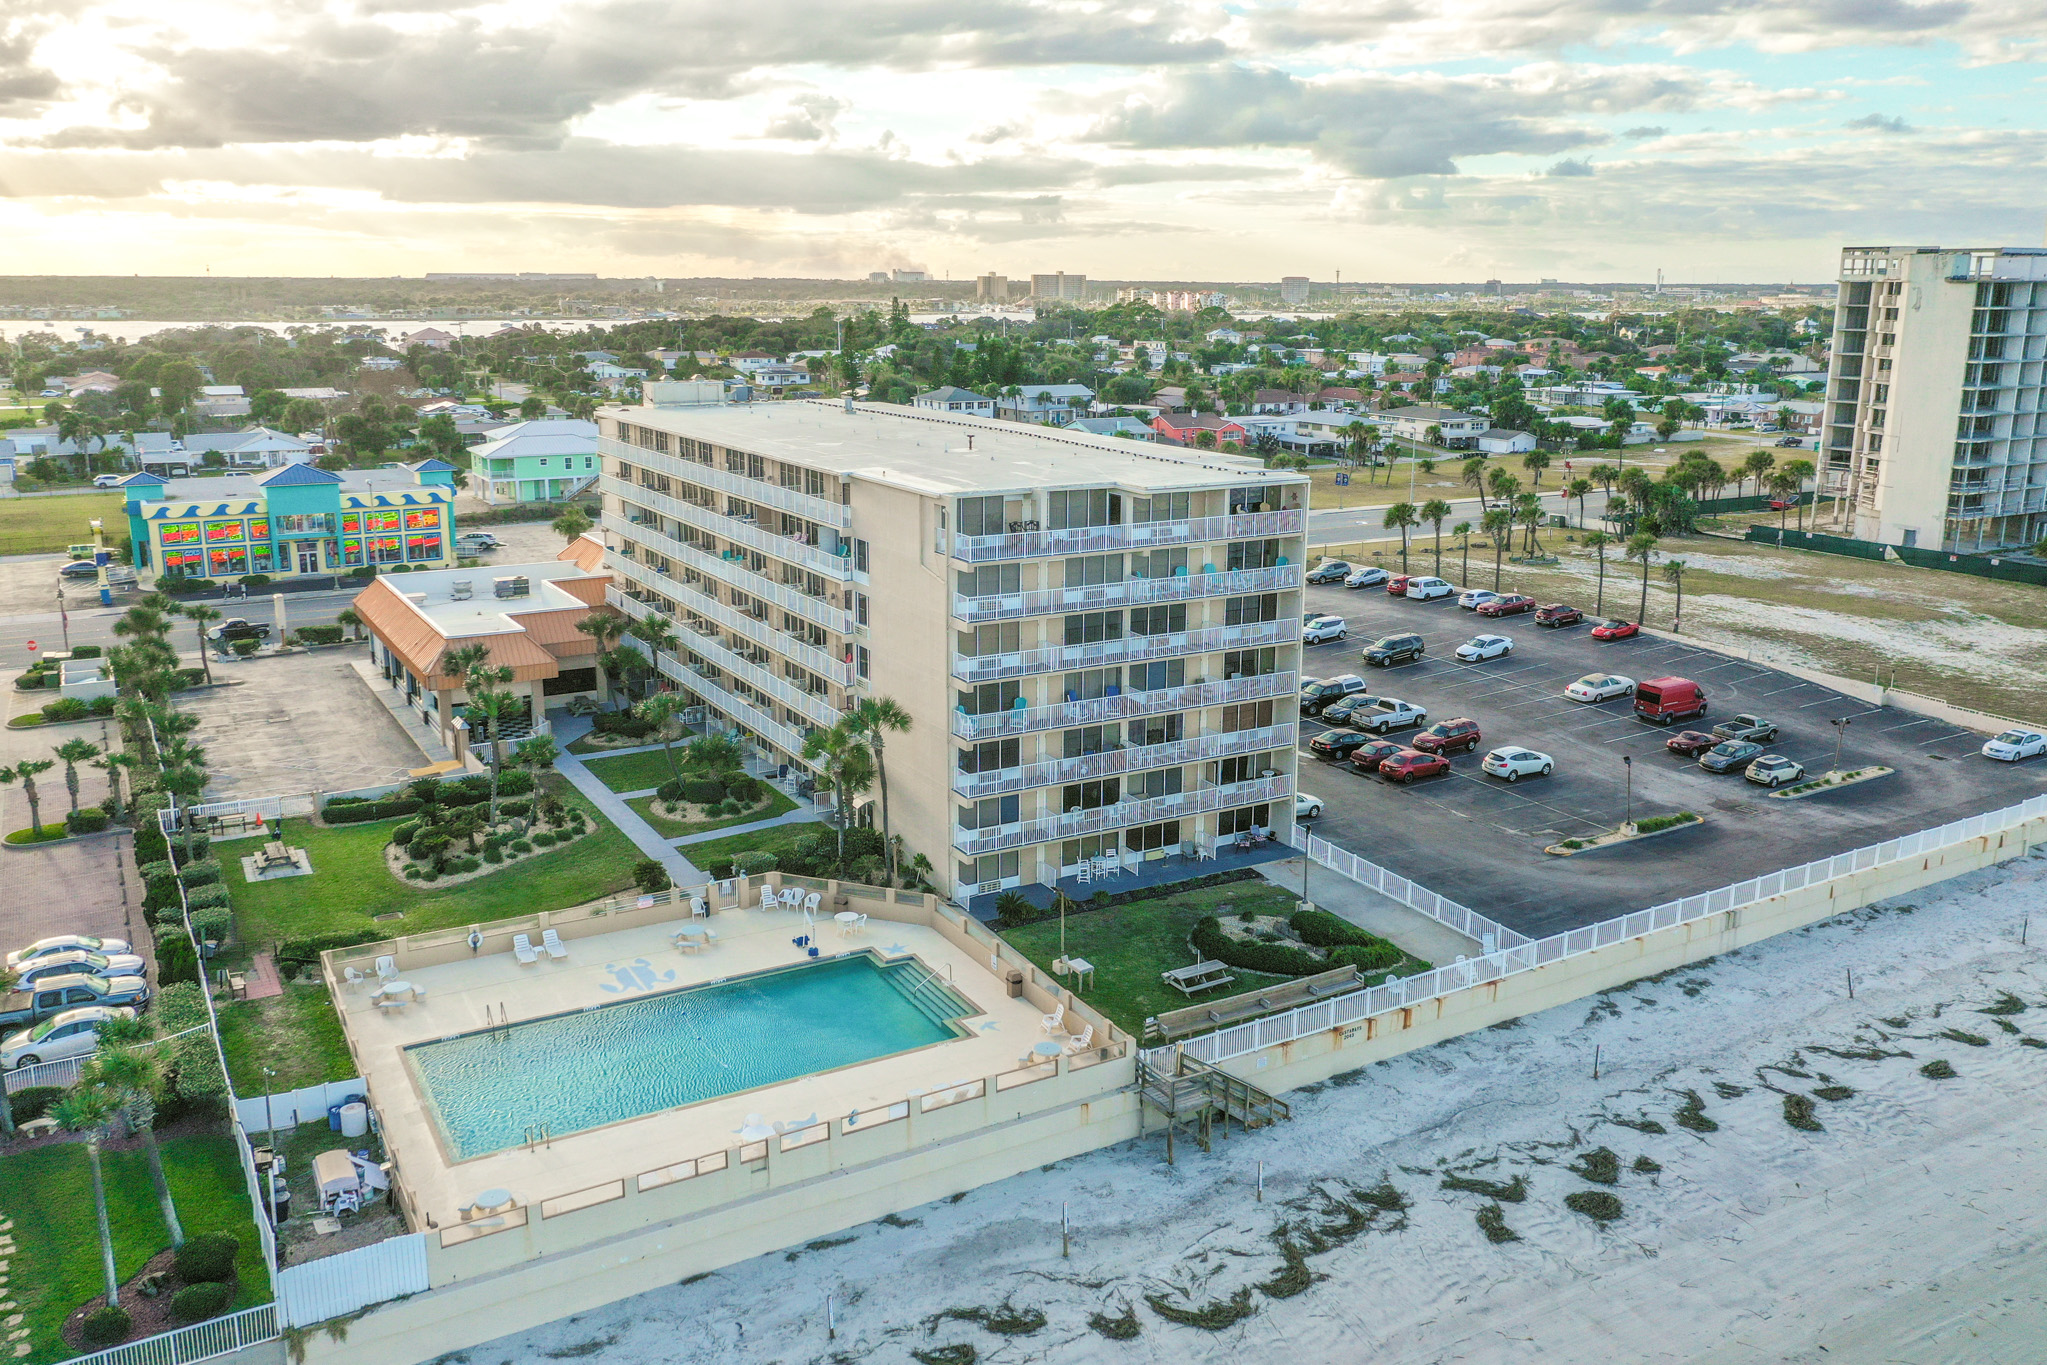 Aerial photo of an oceanfront condo complex